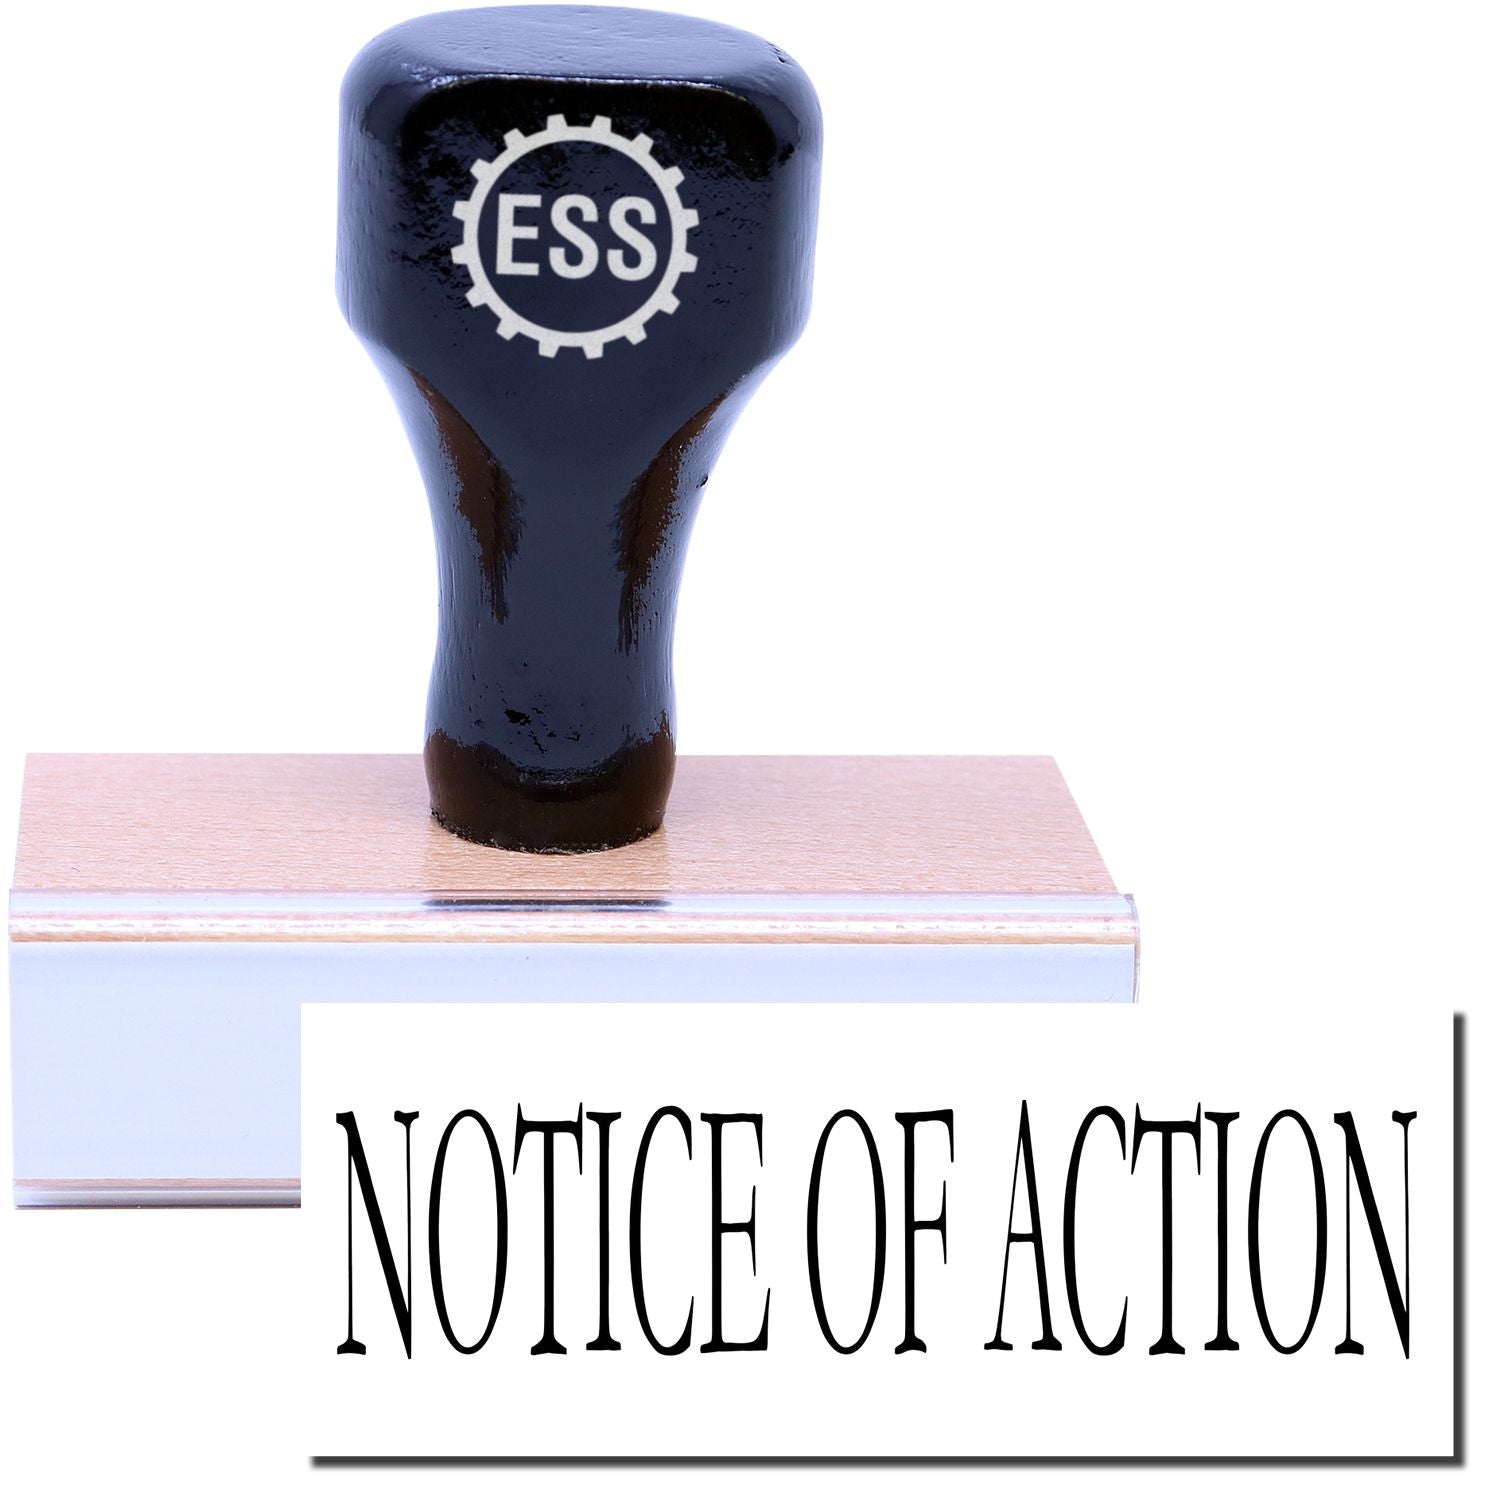 A stock office rubber stamp with a stamped image showing how the text "NOTICE OF ACTION" in a large font is displayed after stamping.